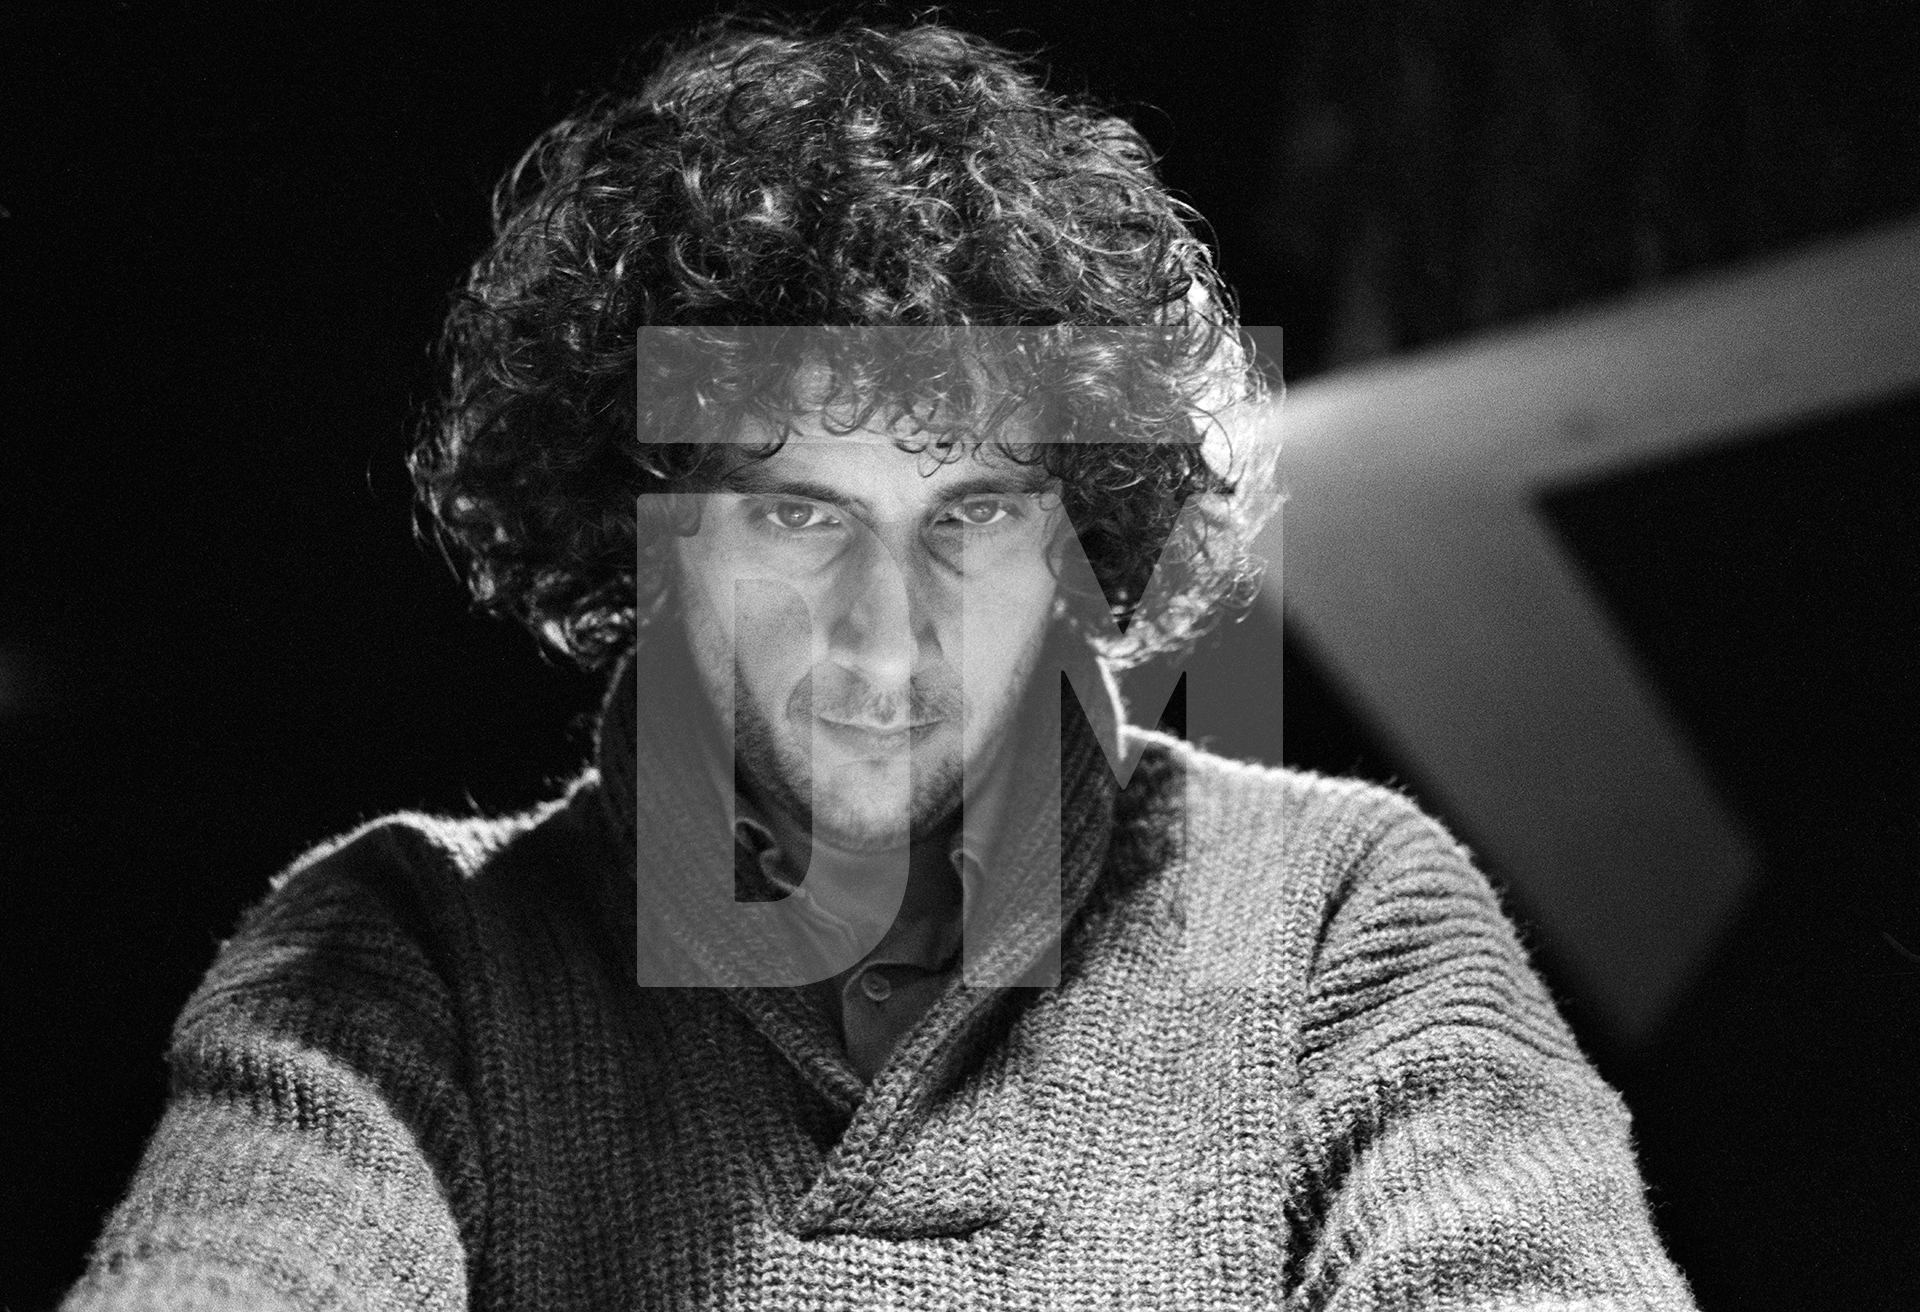 Martin Hannett, Factory producer at Pennine Sound Studio, Oldham. January 1980 by Daniel Meadows